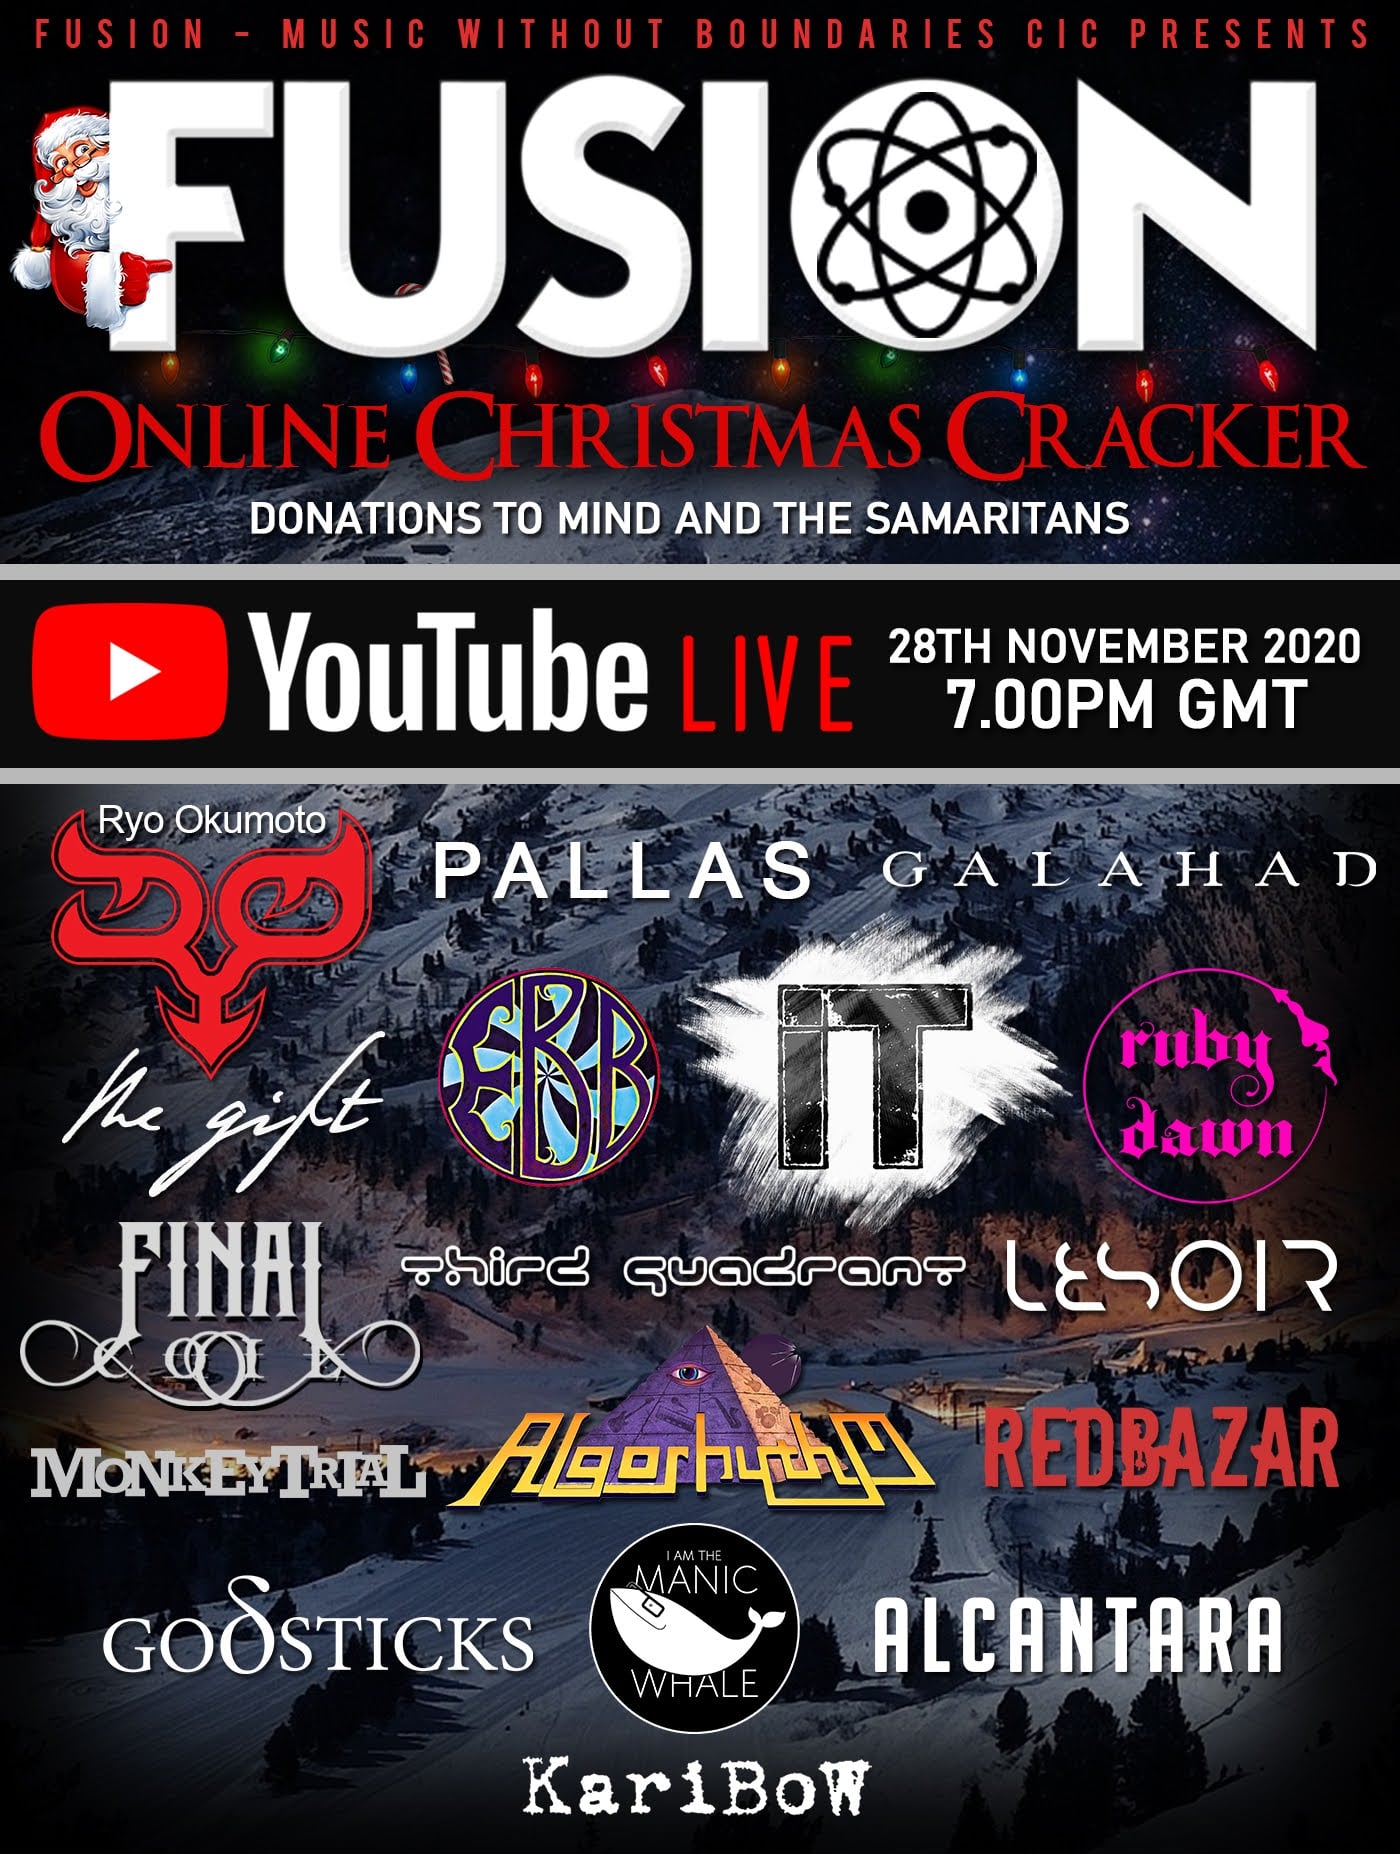 Fusion Online Christmas Cracker Live Stream... and support me on Patreon!